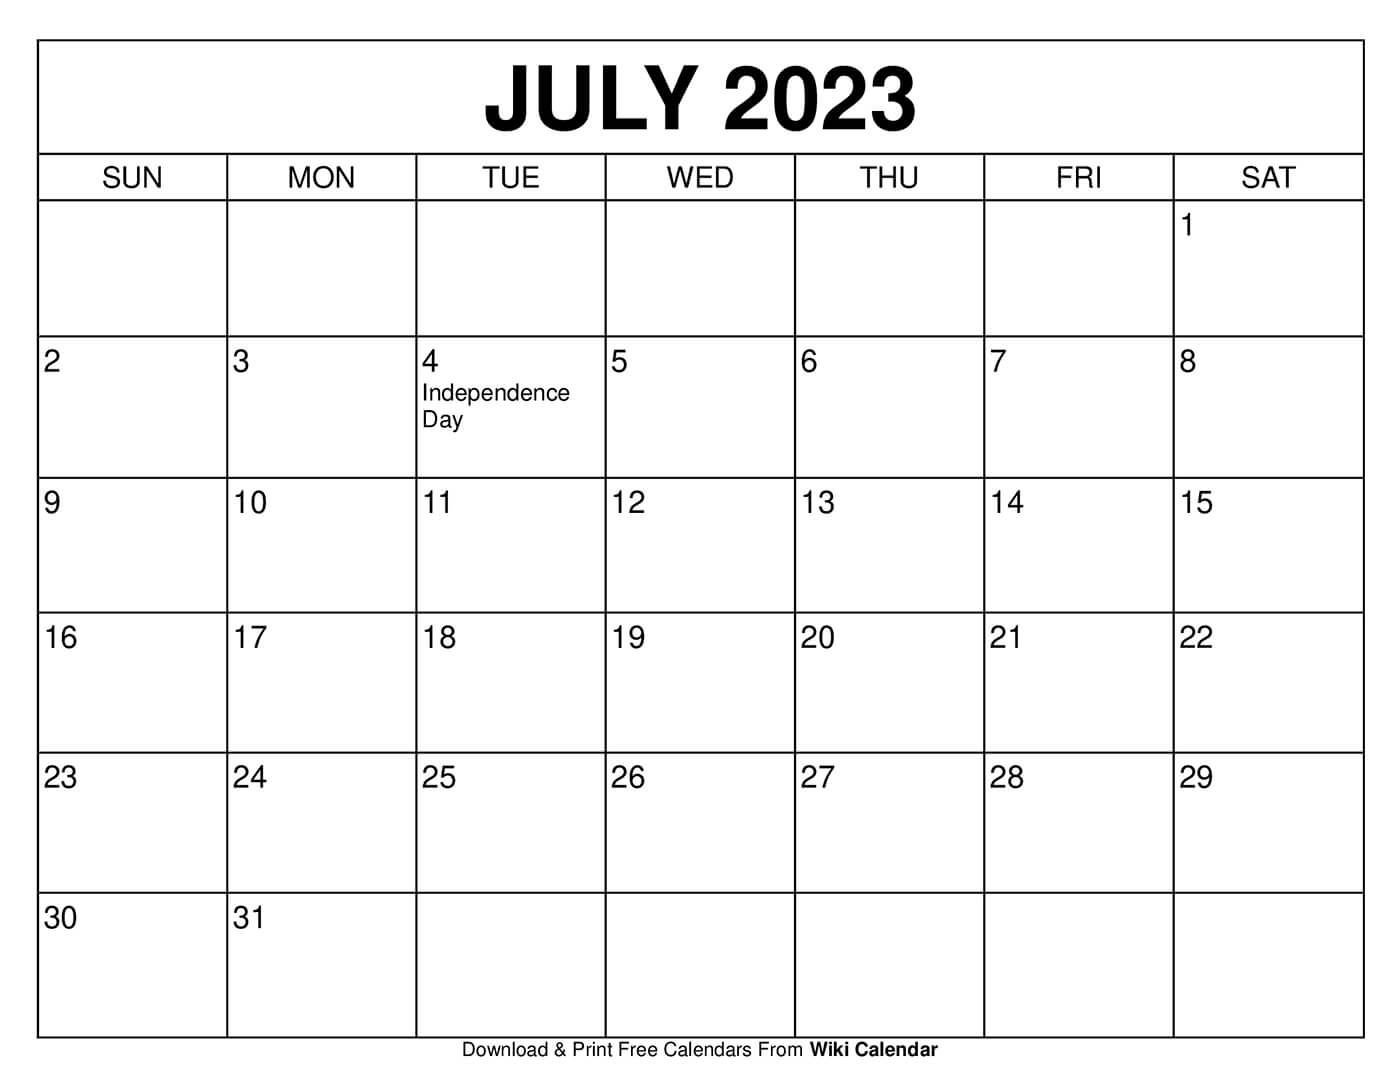 United at a Glance – August 2023